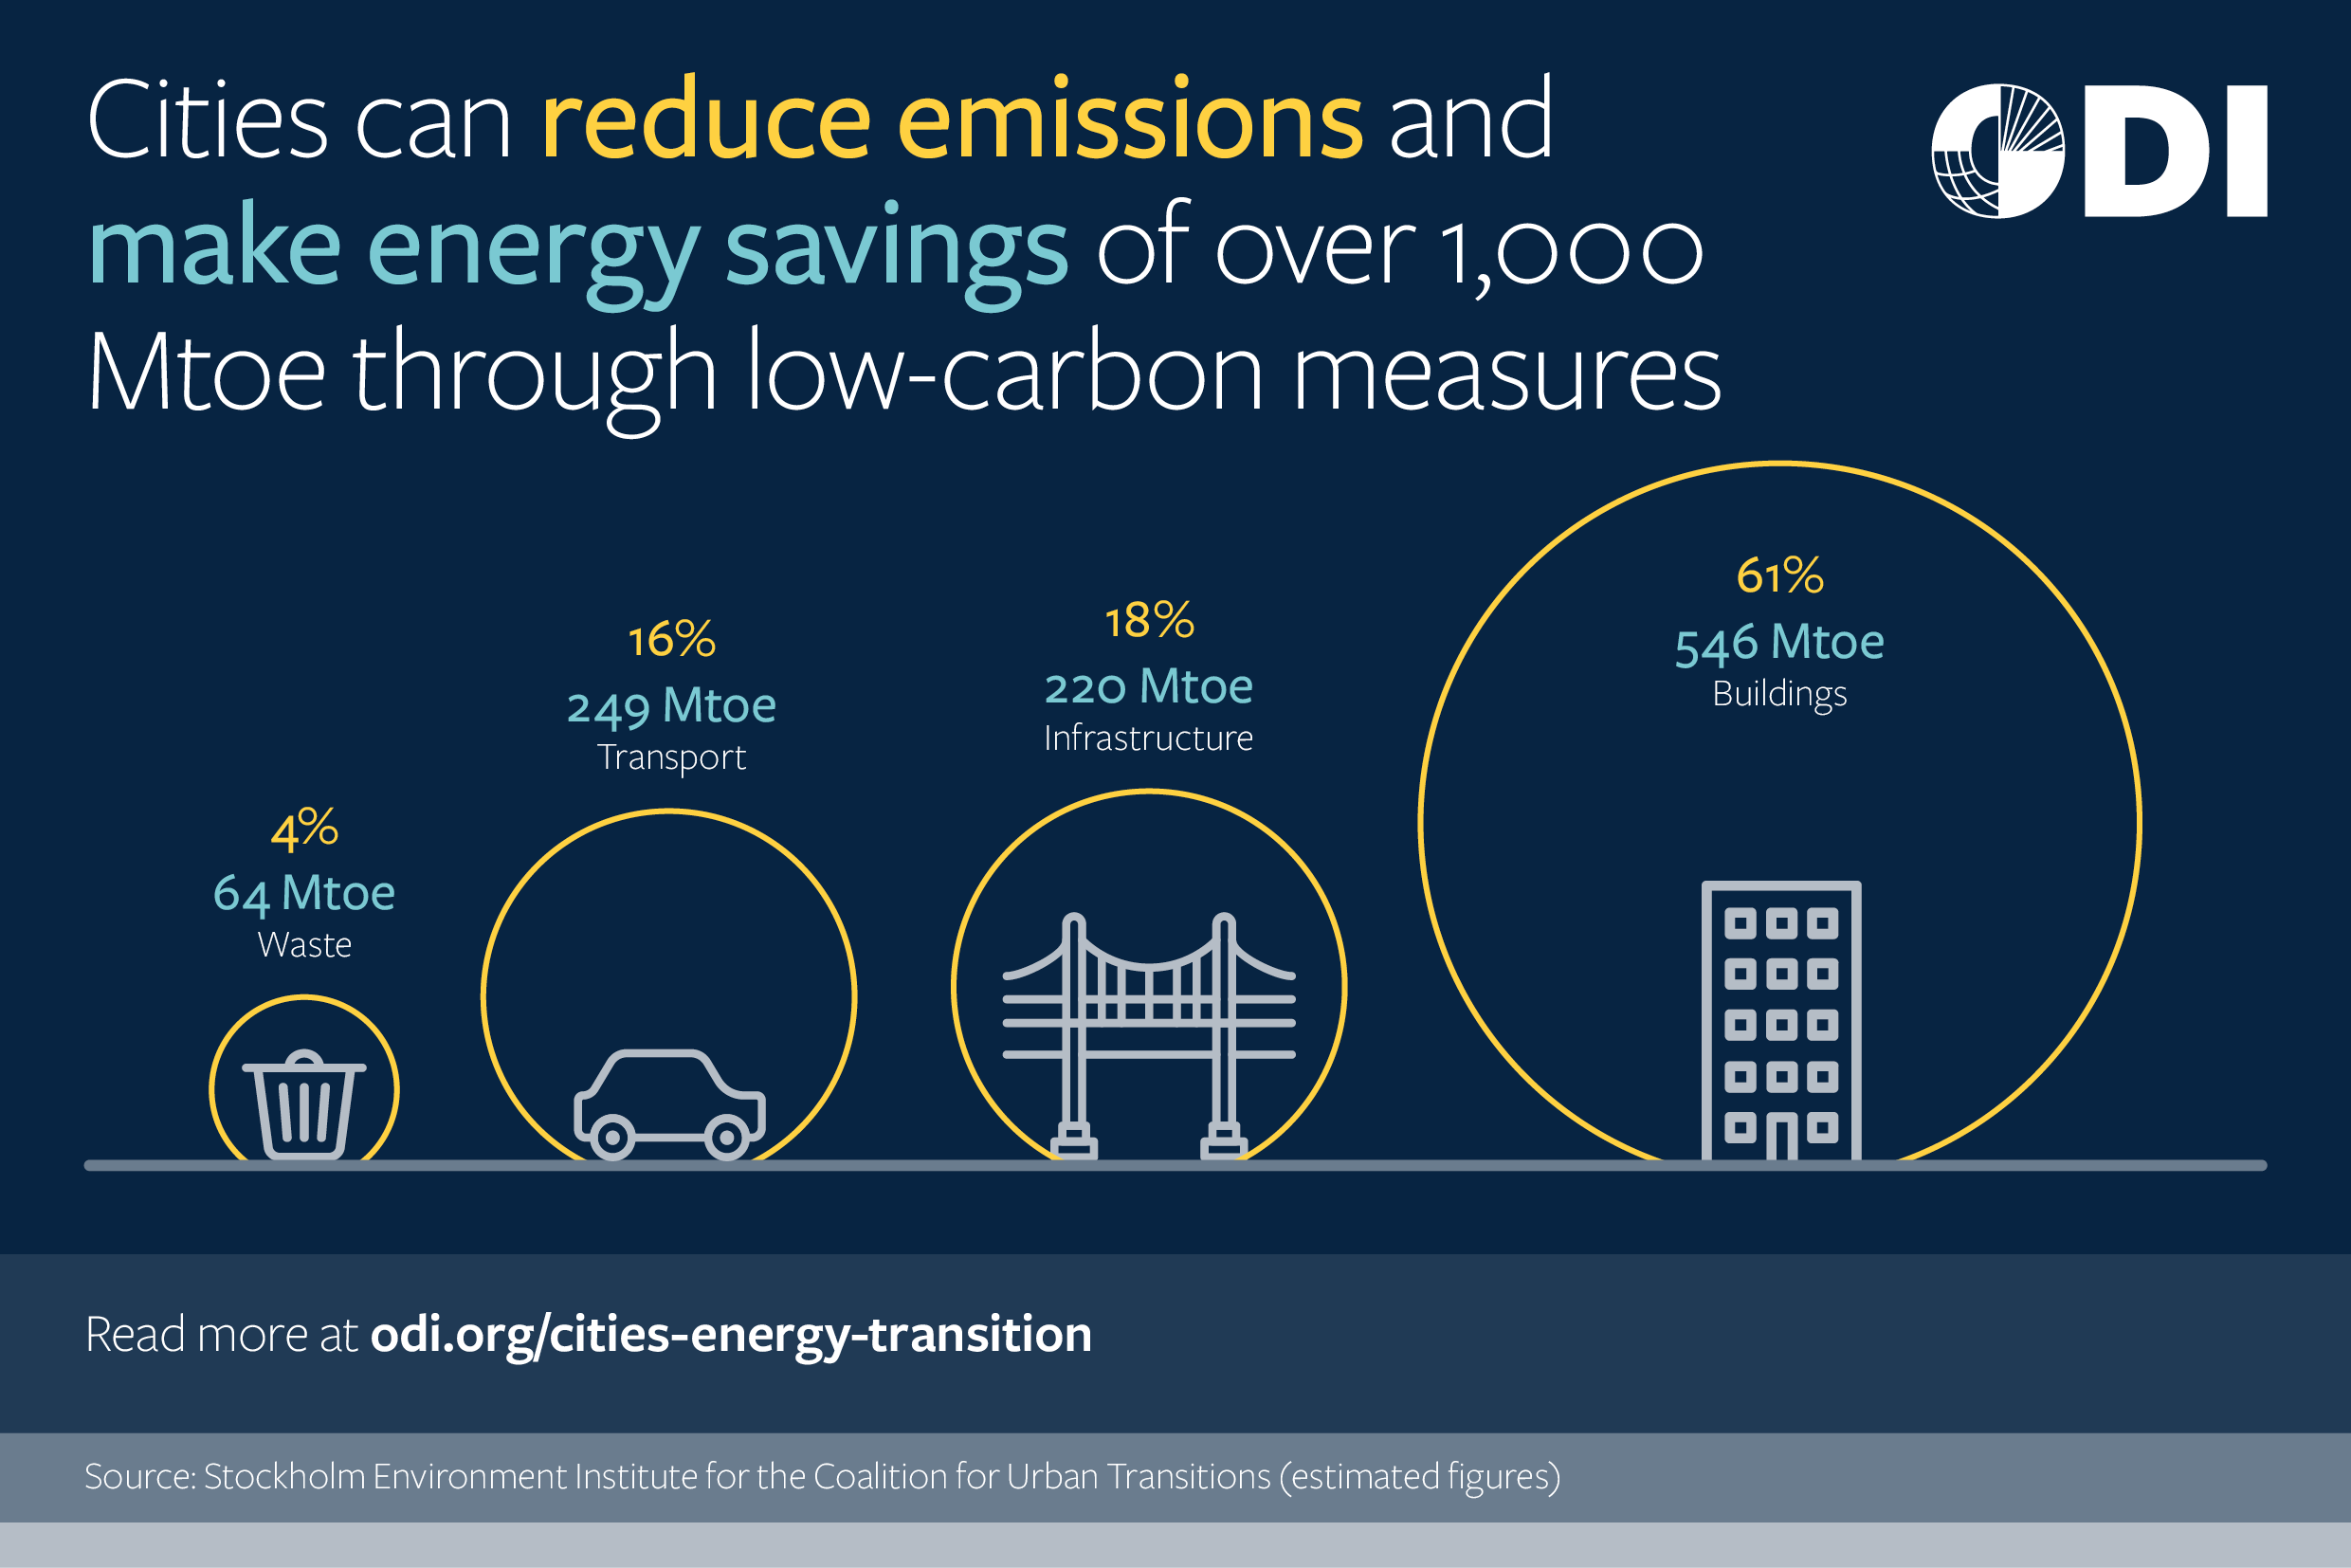 Cities can reduce emissions and make energy savings of over 1,000 Mtoe through low-carbon measures.